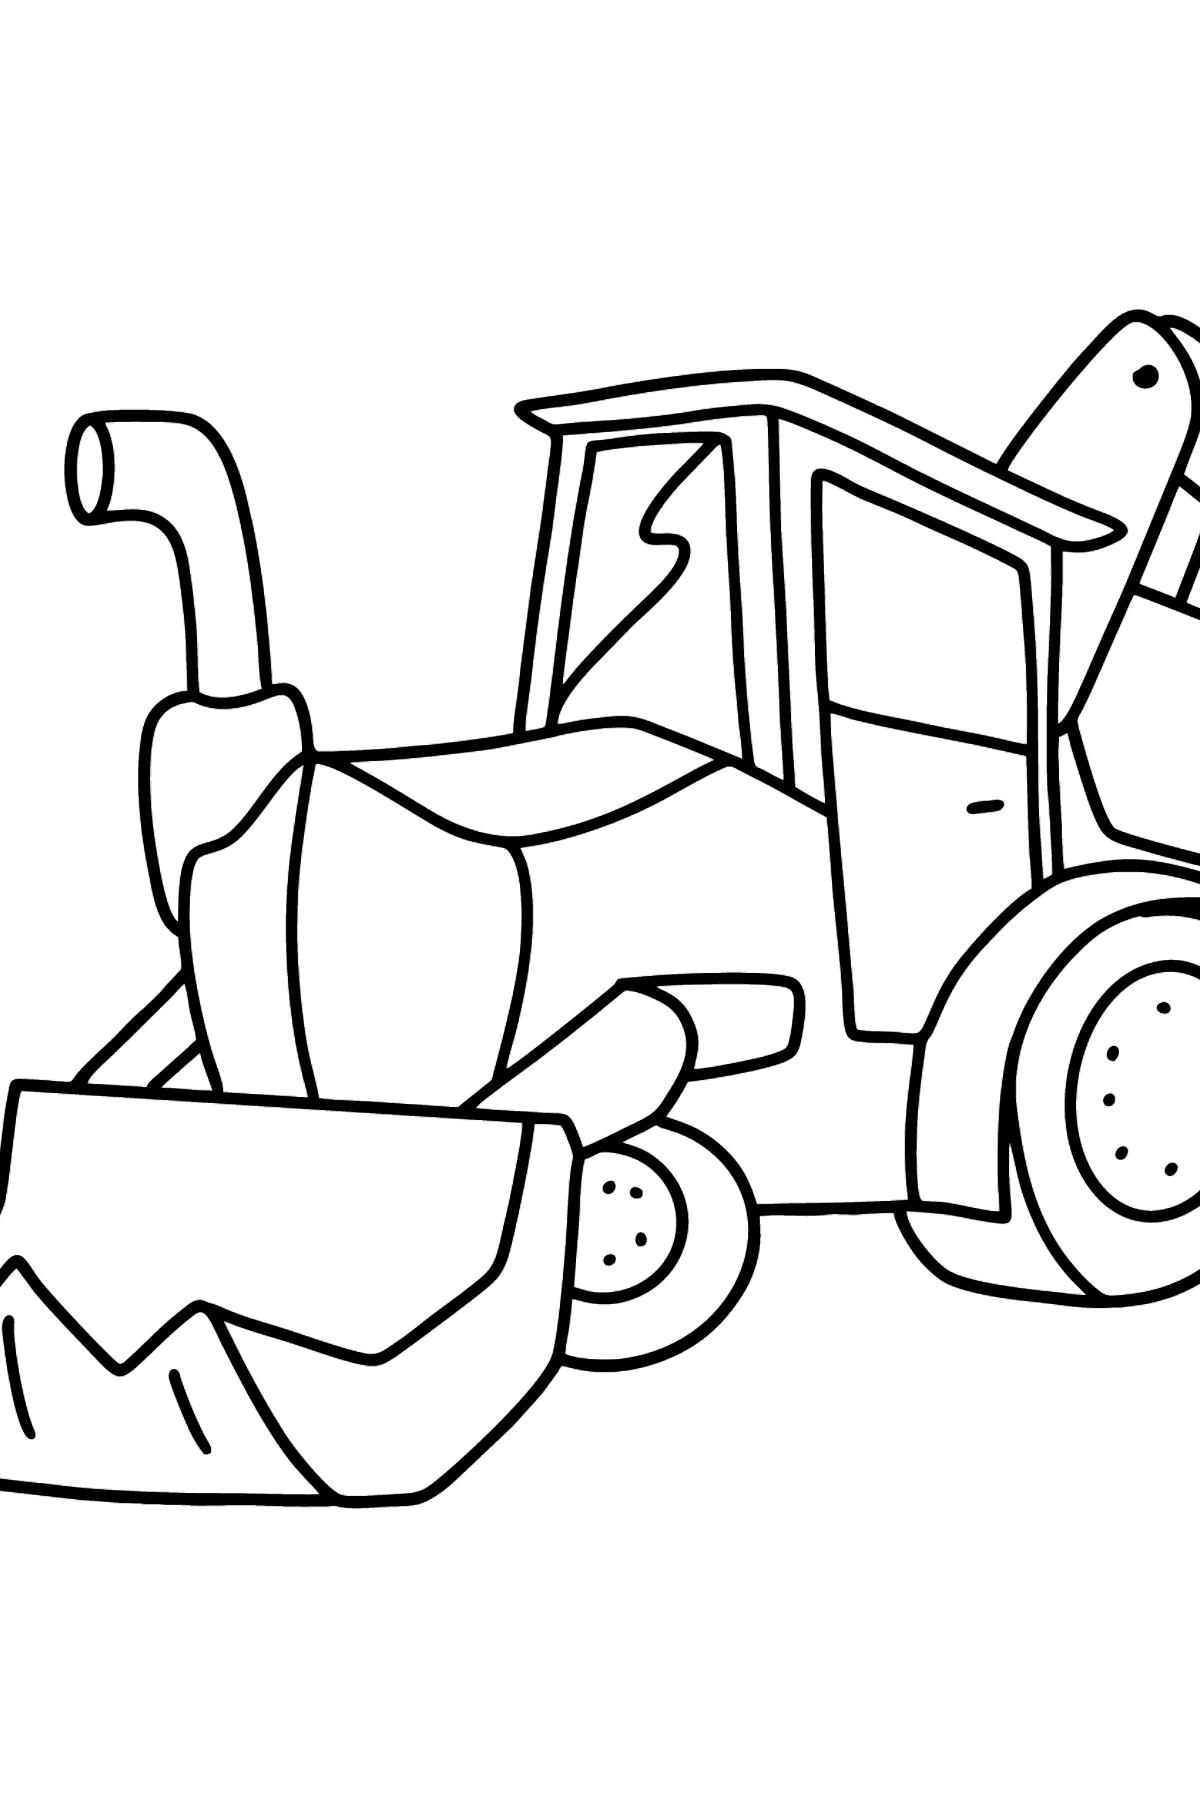 Tractor with Two Buckets coloring page - Coloring Pages for Kids